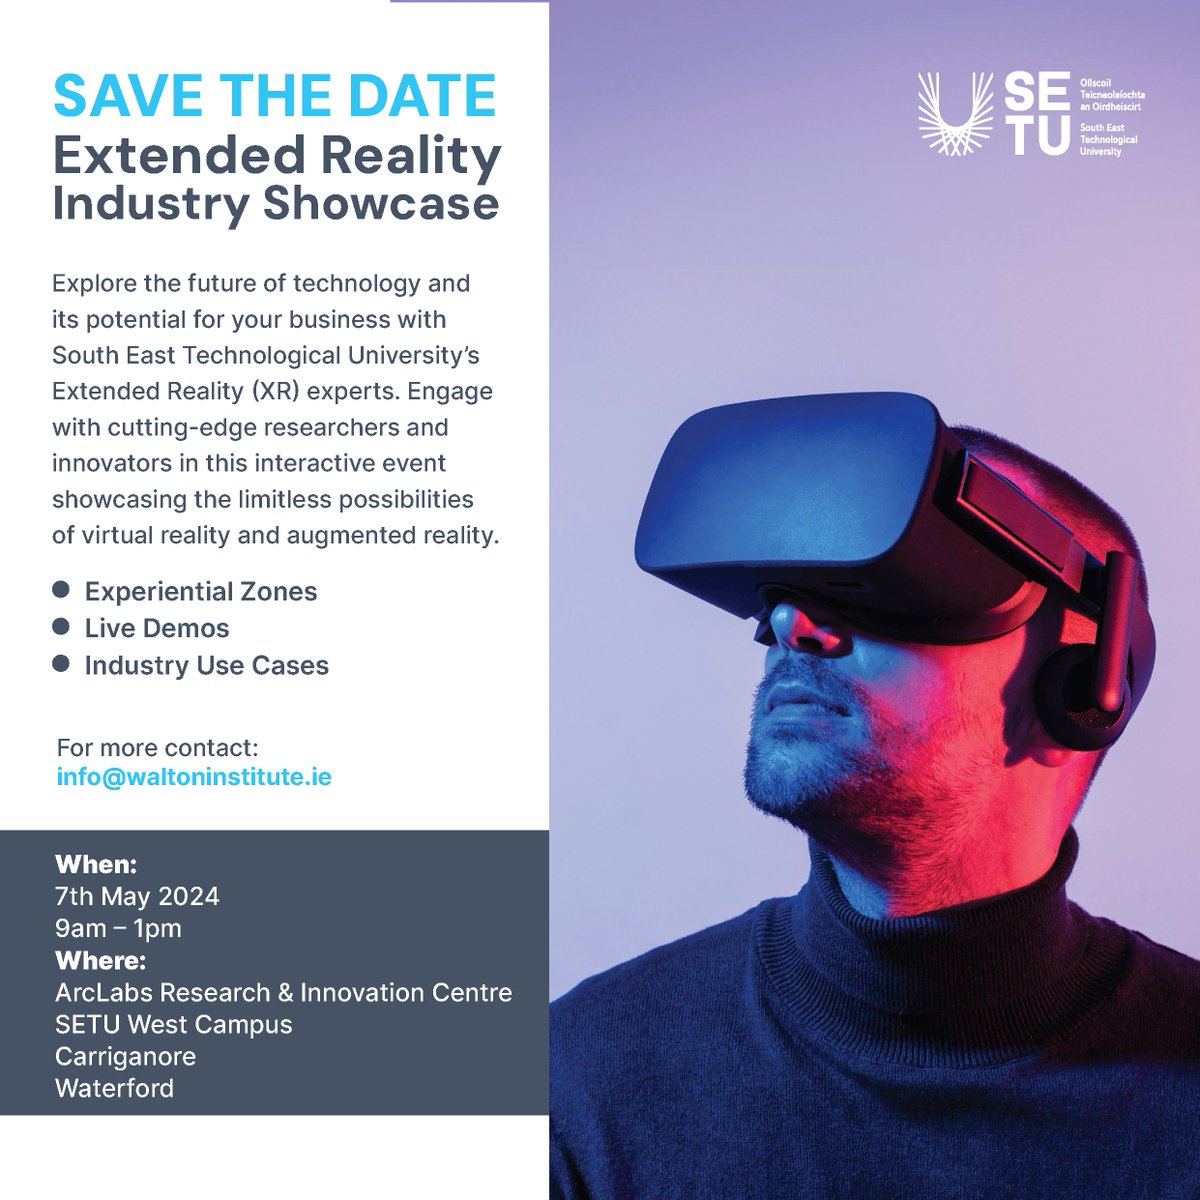 REGISTRATION OPENS NEXT WEEK! We're thrilled to announce @WaltonInst's participation in a new @SETUIreland Extended Reality (#XR) event for industry, taking place May 7th at 9am - 1pm in @ArclabsSETU. Save the date and join us to explore the potential of this exciting technology.